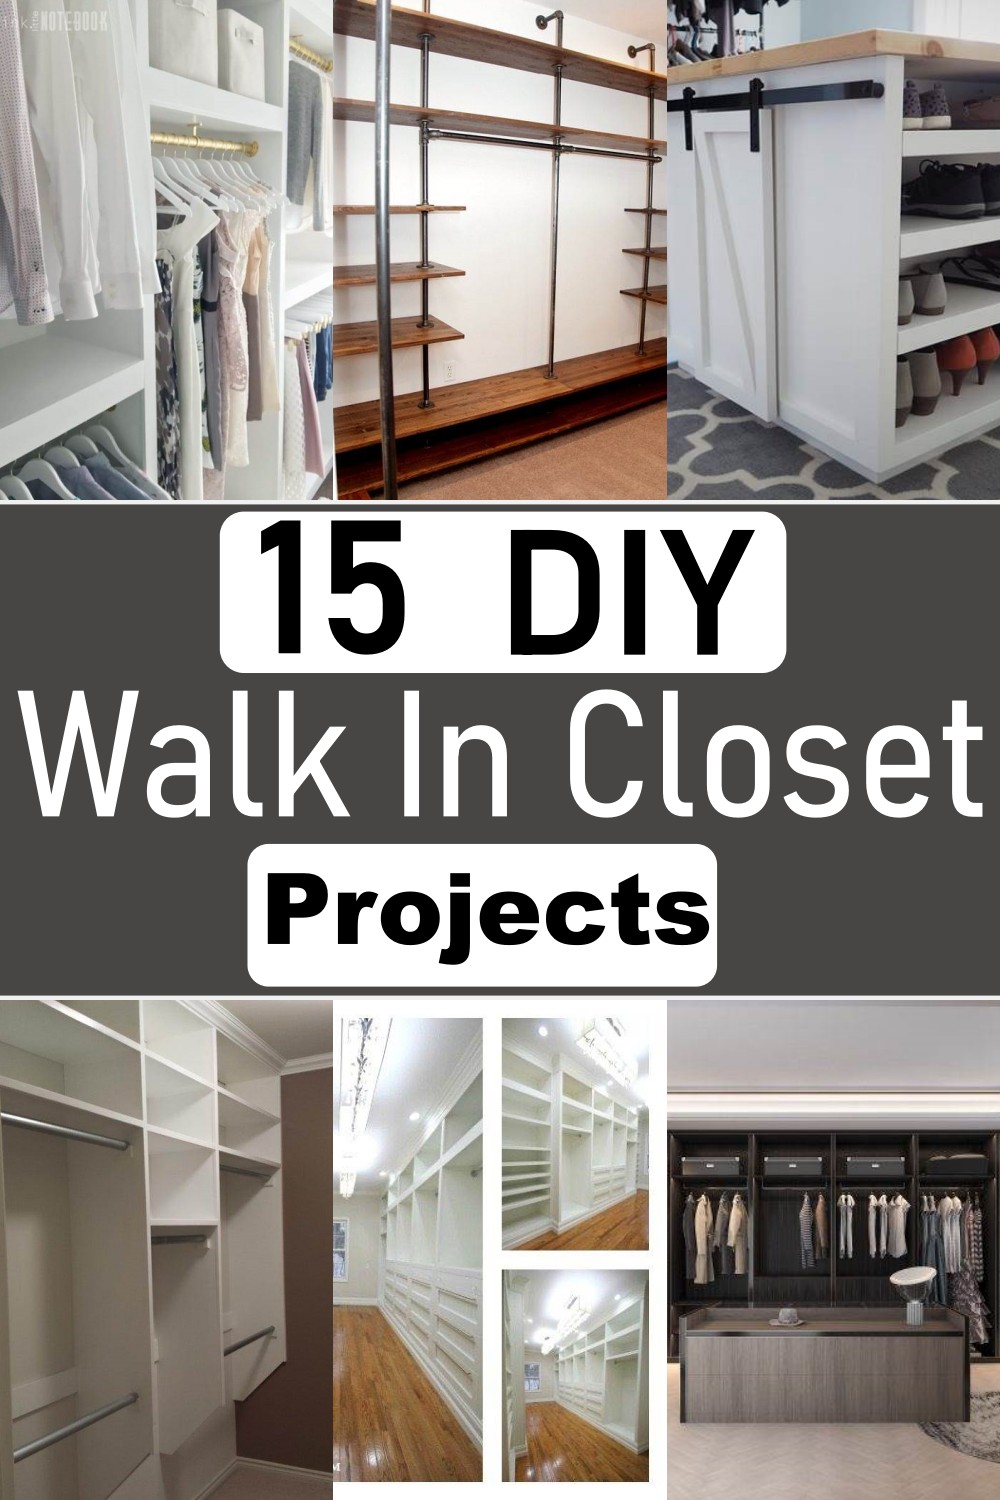  Walk In Closet Projects 